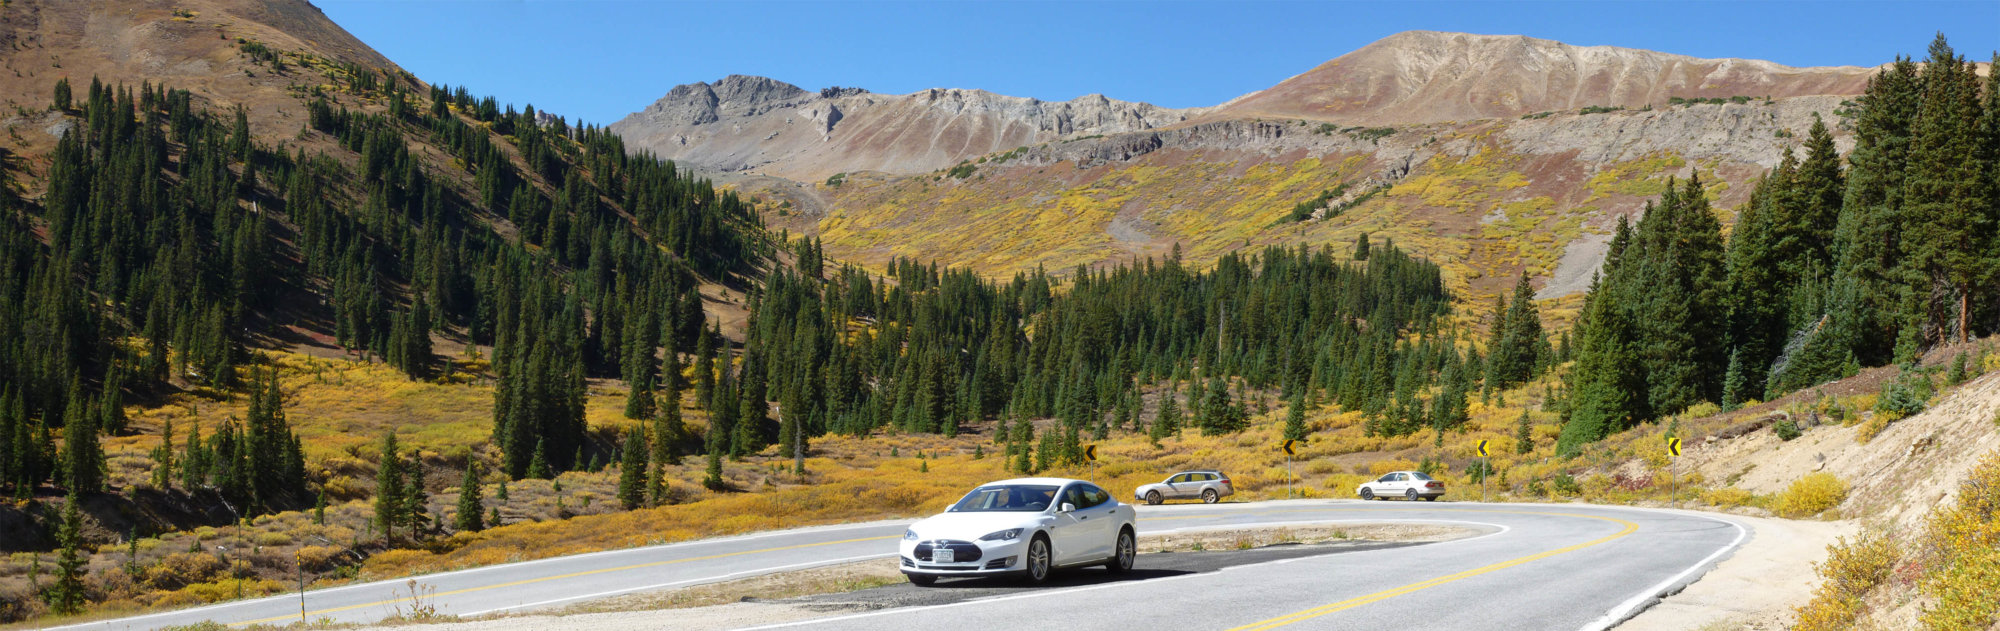 On the road to Independence Pass2117-19sf 9-14-18.JPG